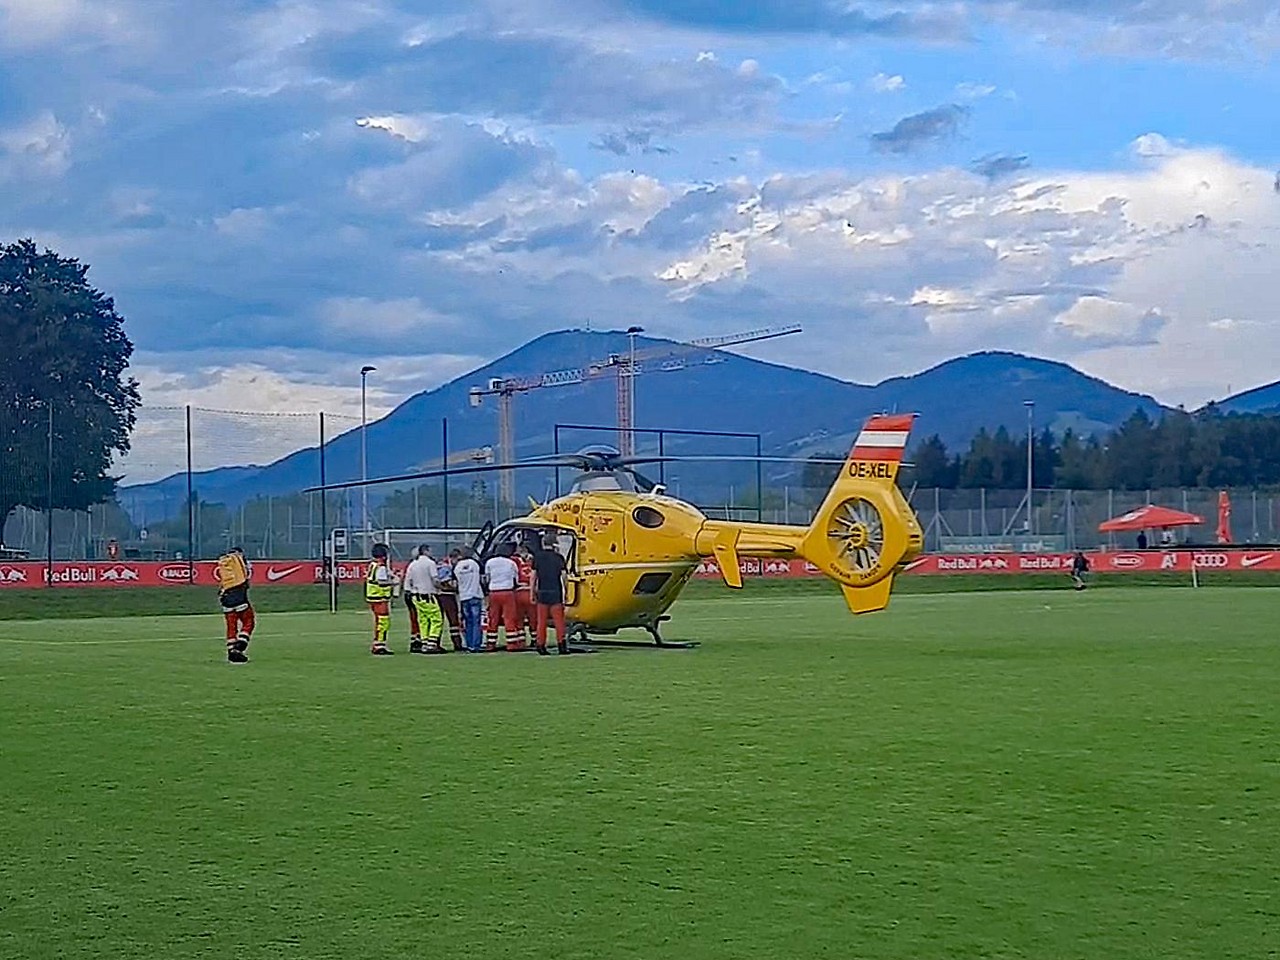 In Anif (Flachgau), a football game on Friday evening had to be canceled due to a serious accident.  A spectator fell about four meters from a grandstand and suffered serious head injuries – during a friendly between the Salzburg “bulls” and CSKA Sofia from Bulgaria.